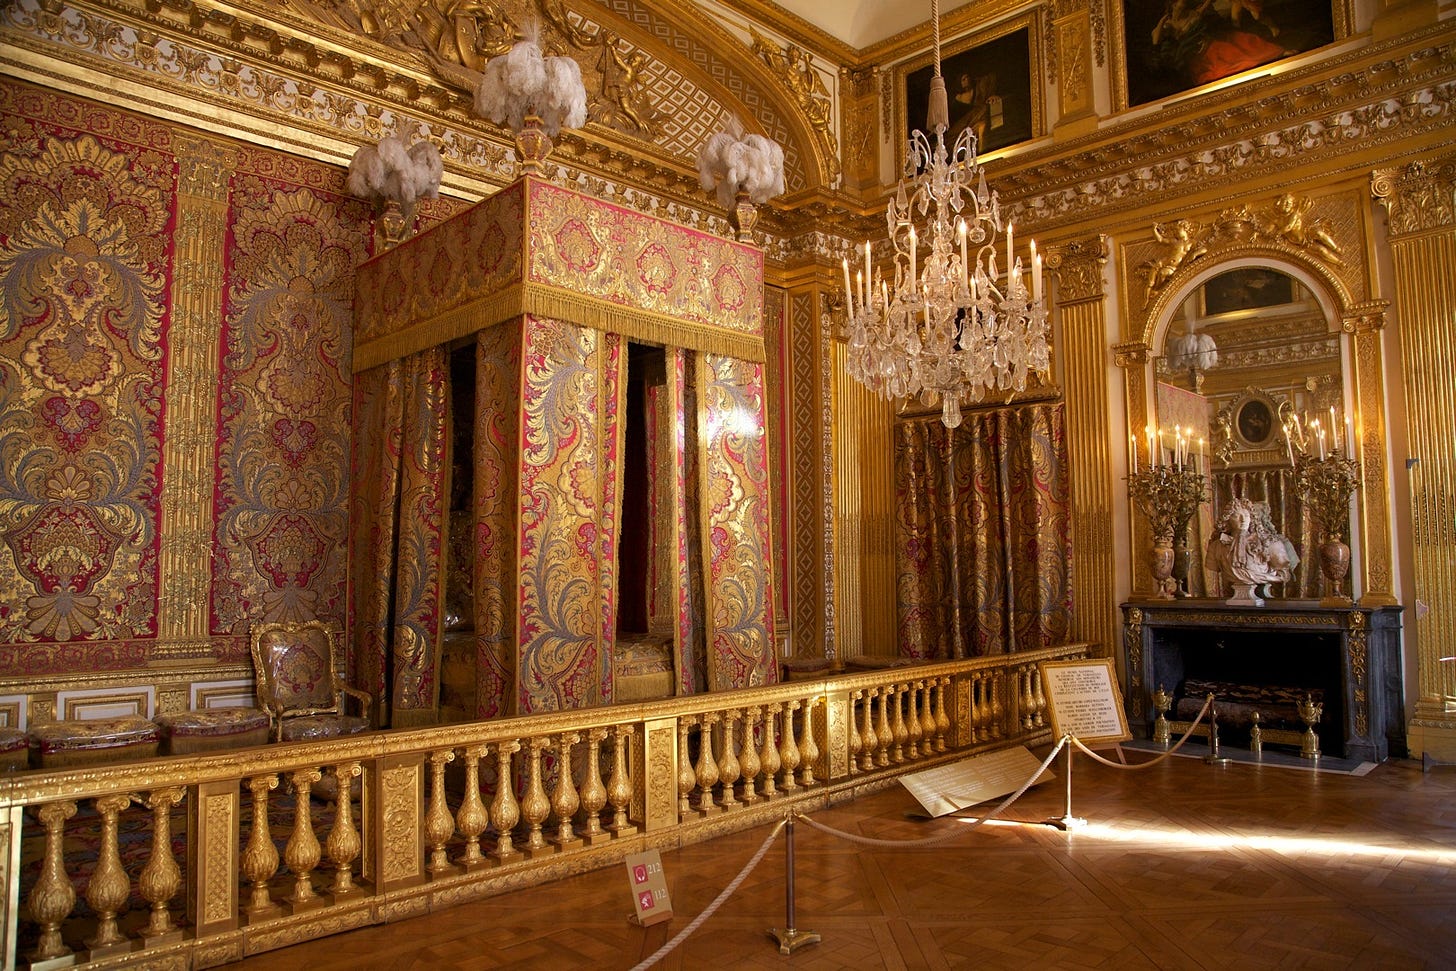 King's Bedchamber (room 5) in the King's Apartment